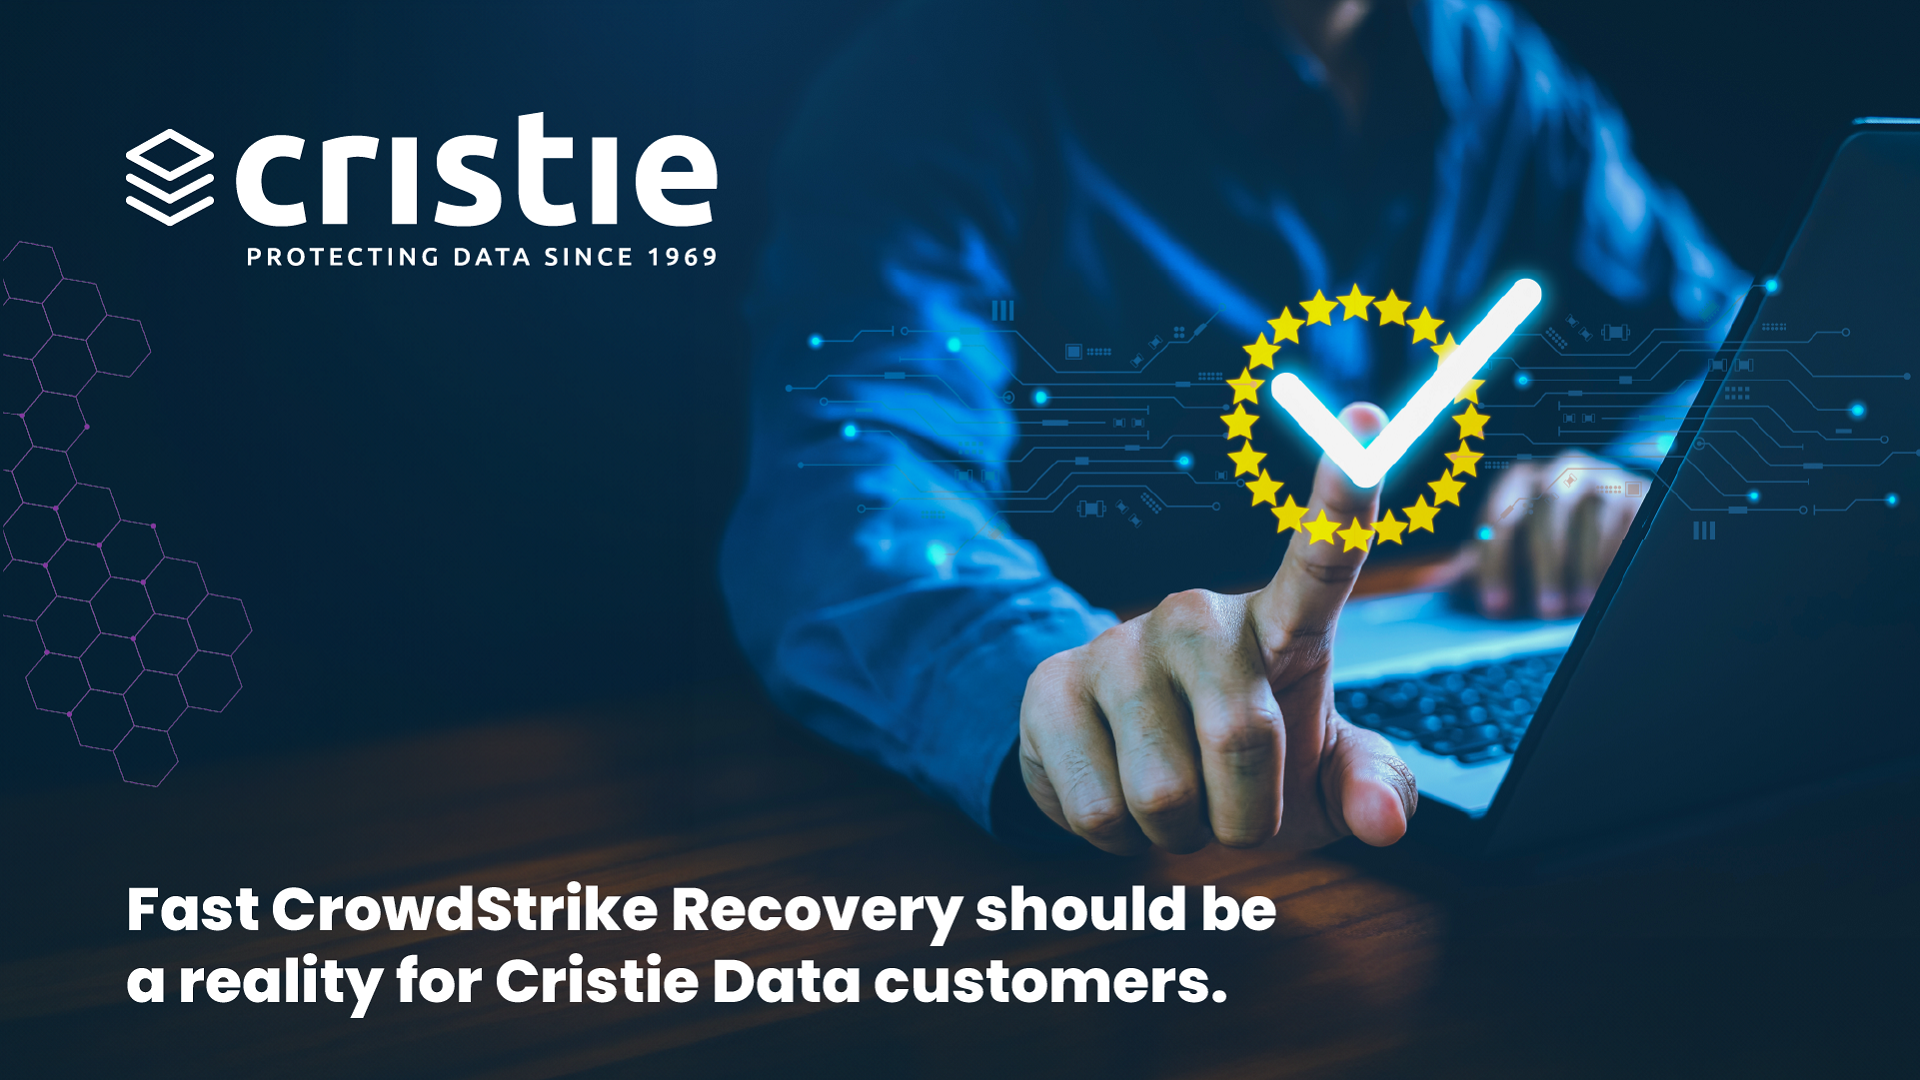 Fast CrowdStrike Recovery should be a reality for Cristie Data customers